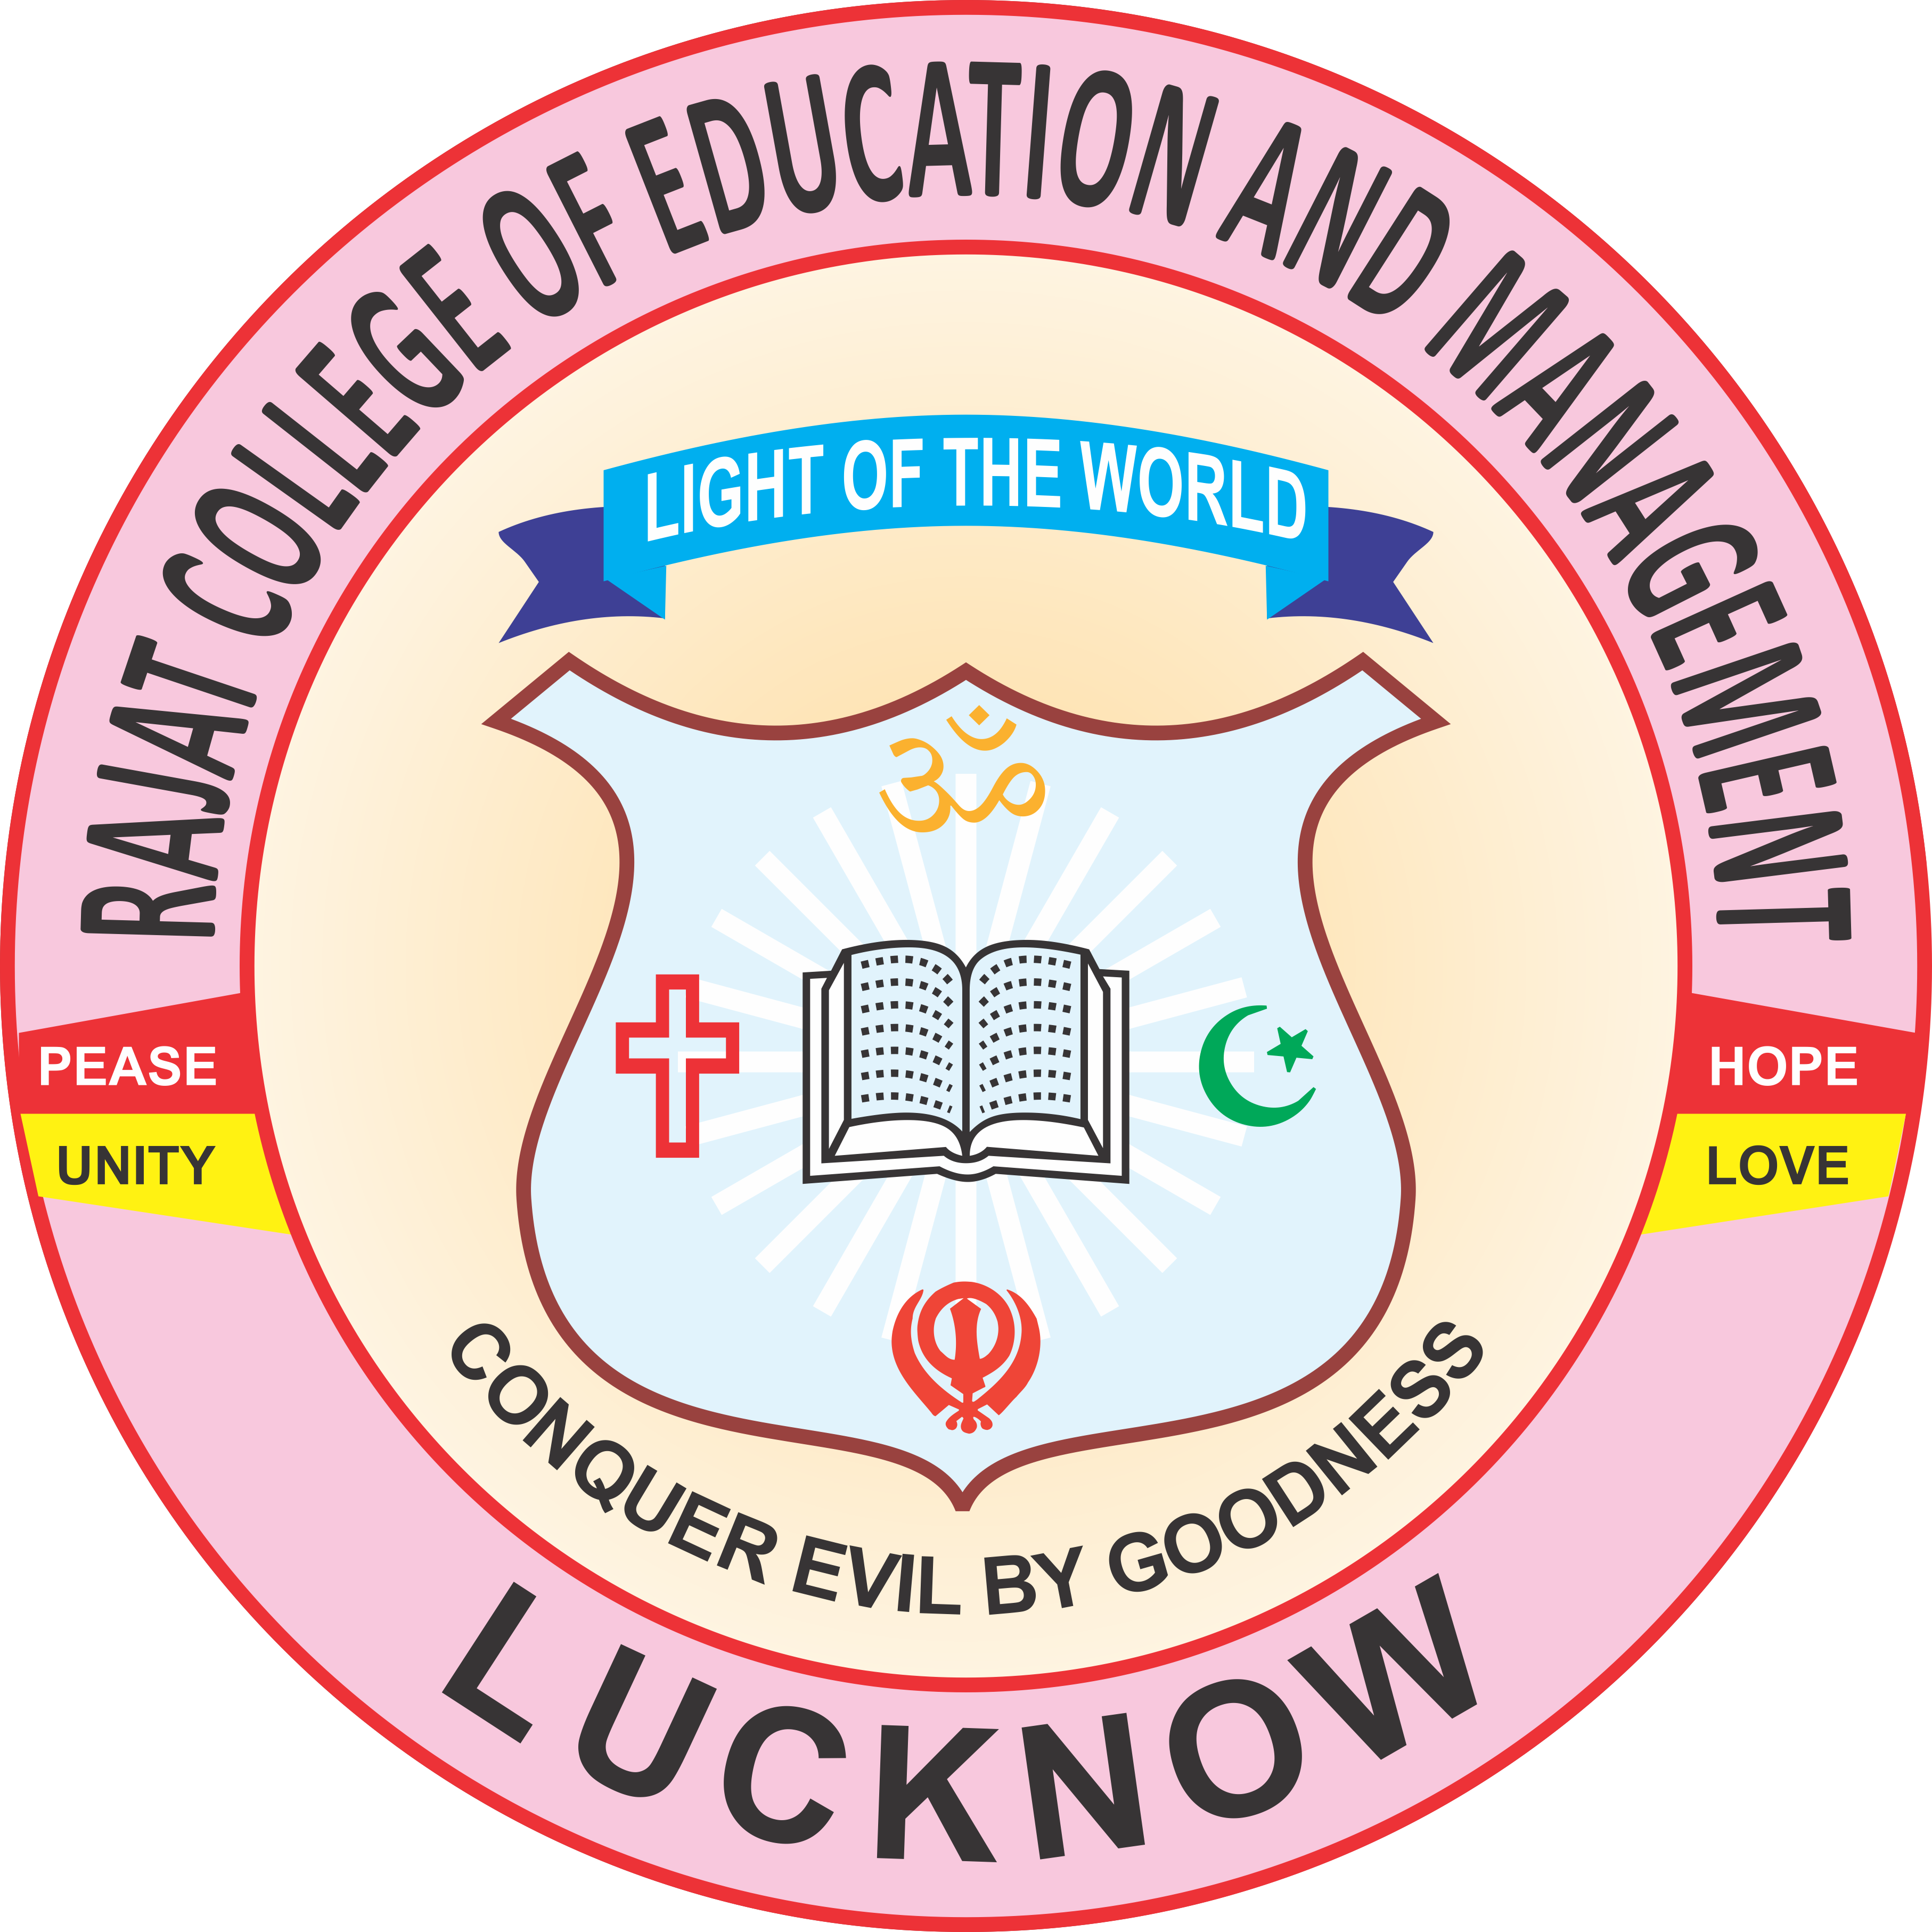 Rajat College of Education and Management Lucknow